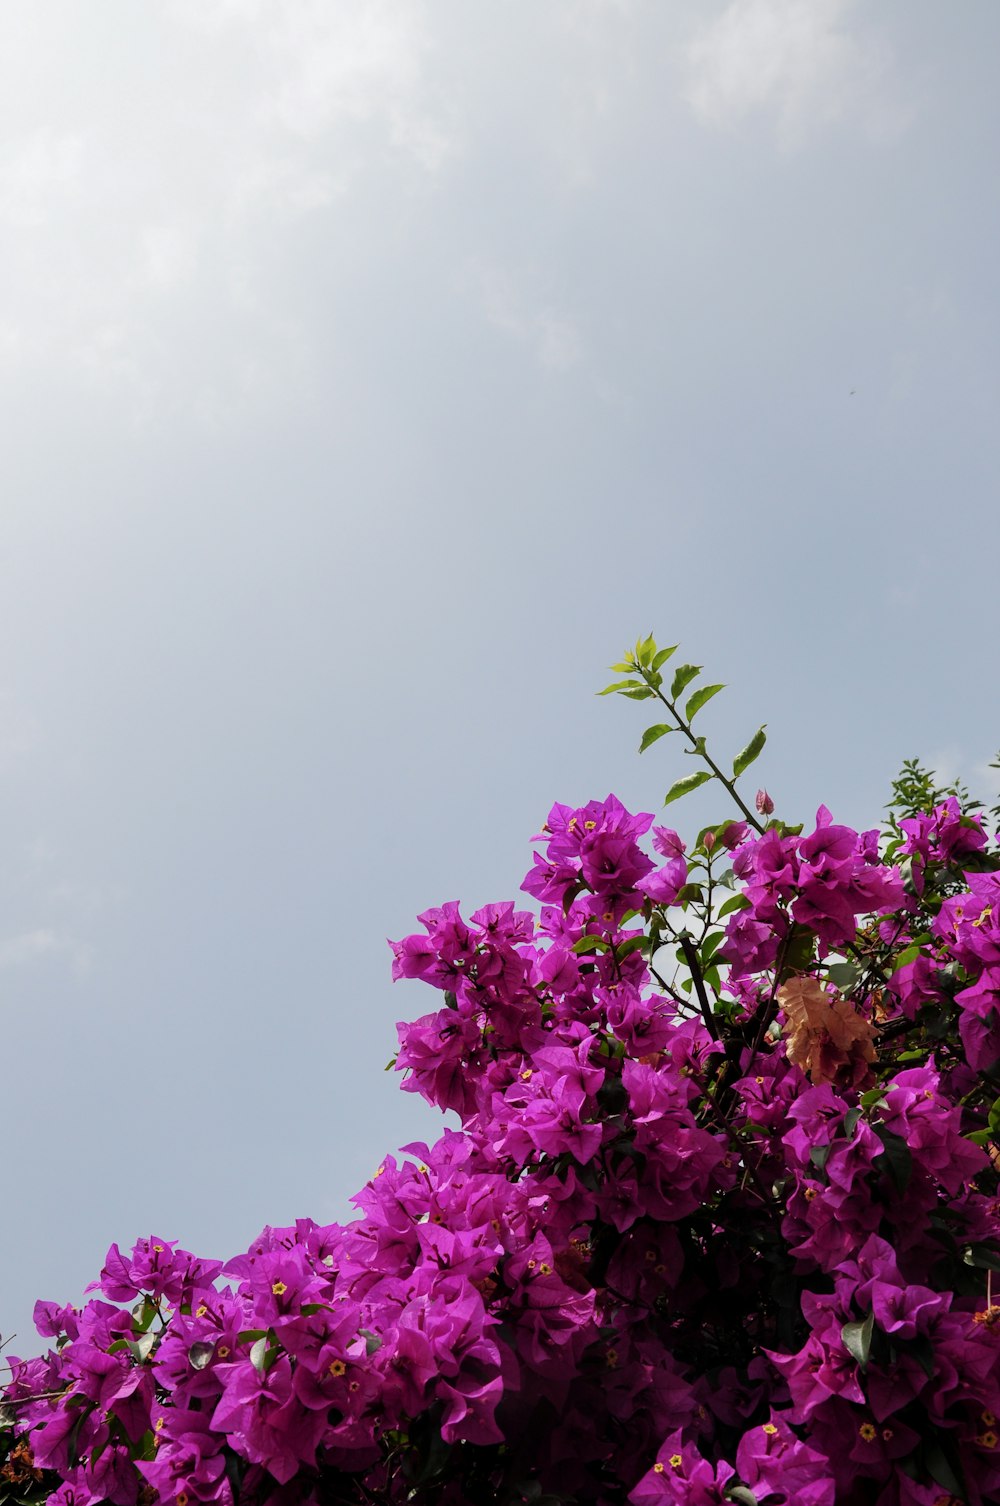 purple flowers blooming on a tree against a blue sky